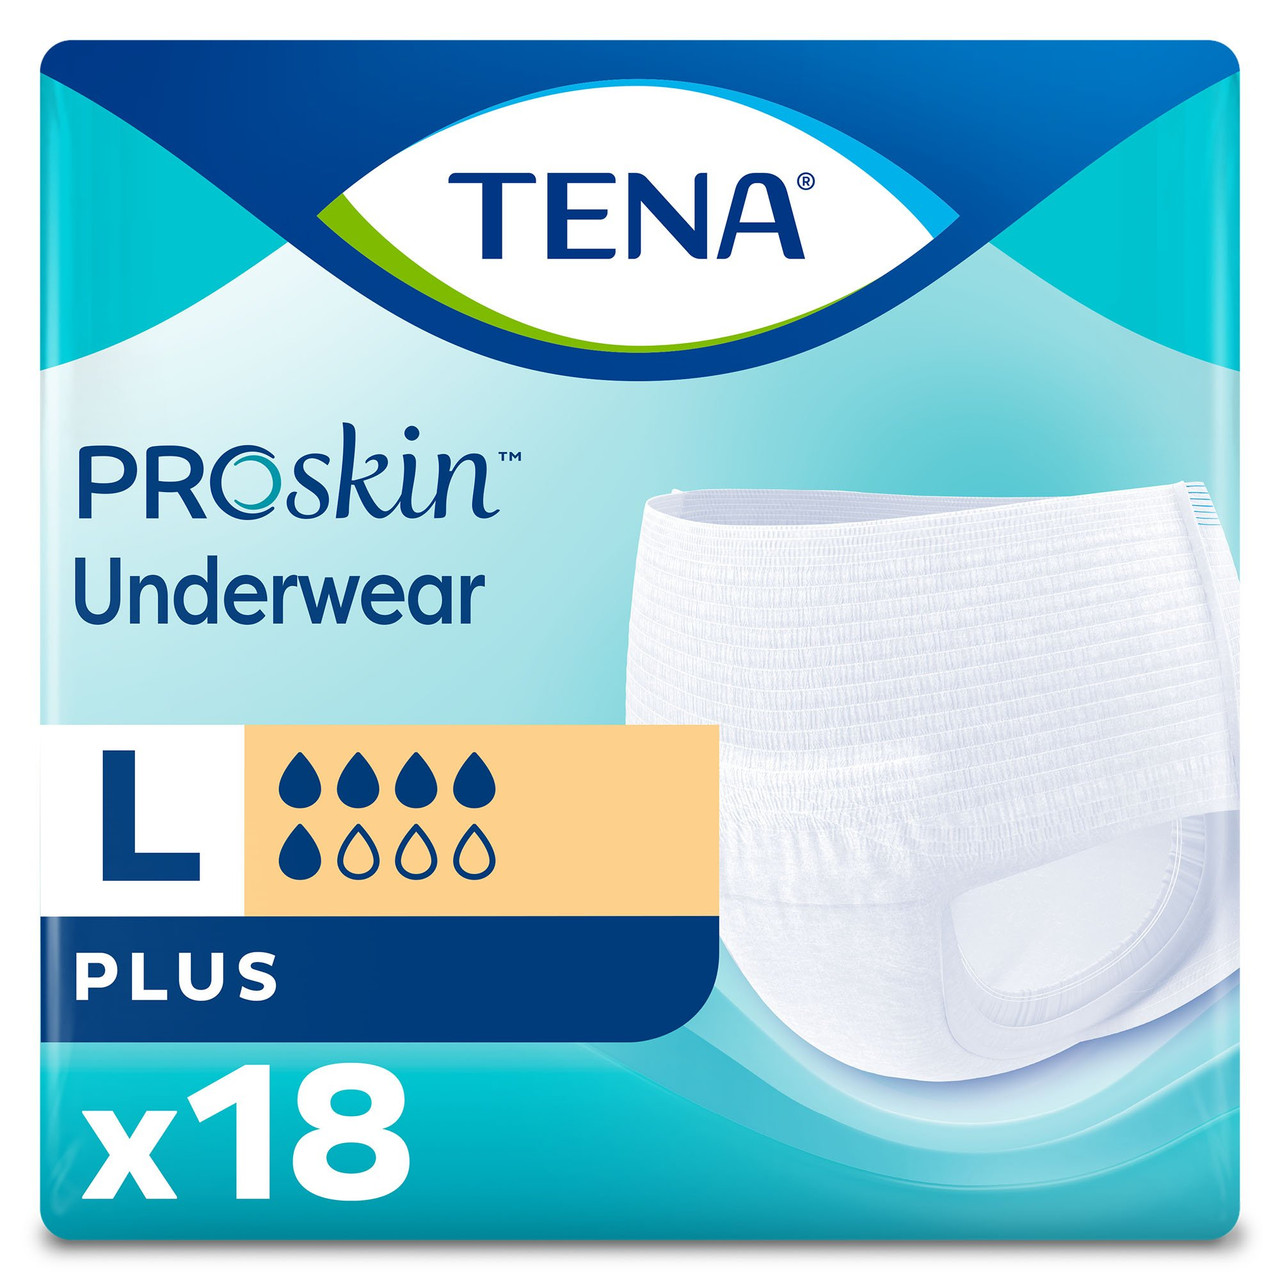 TENA Men's Incontinence Underwear, Super Plus Absorbency with Leakage ...